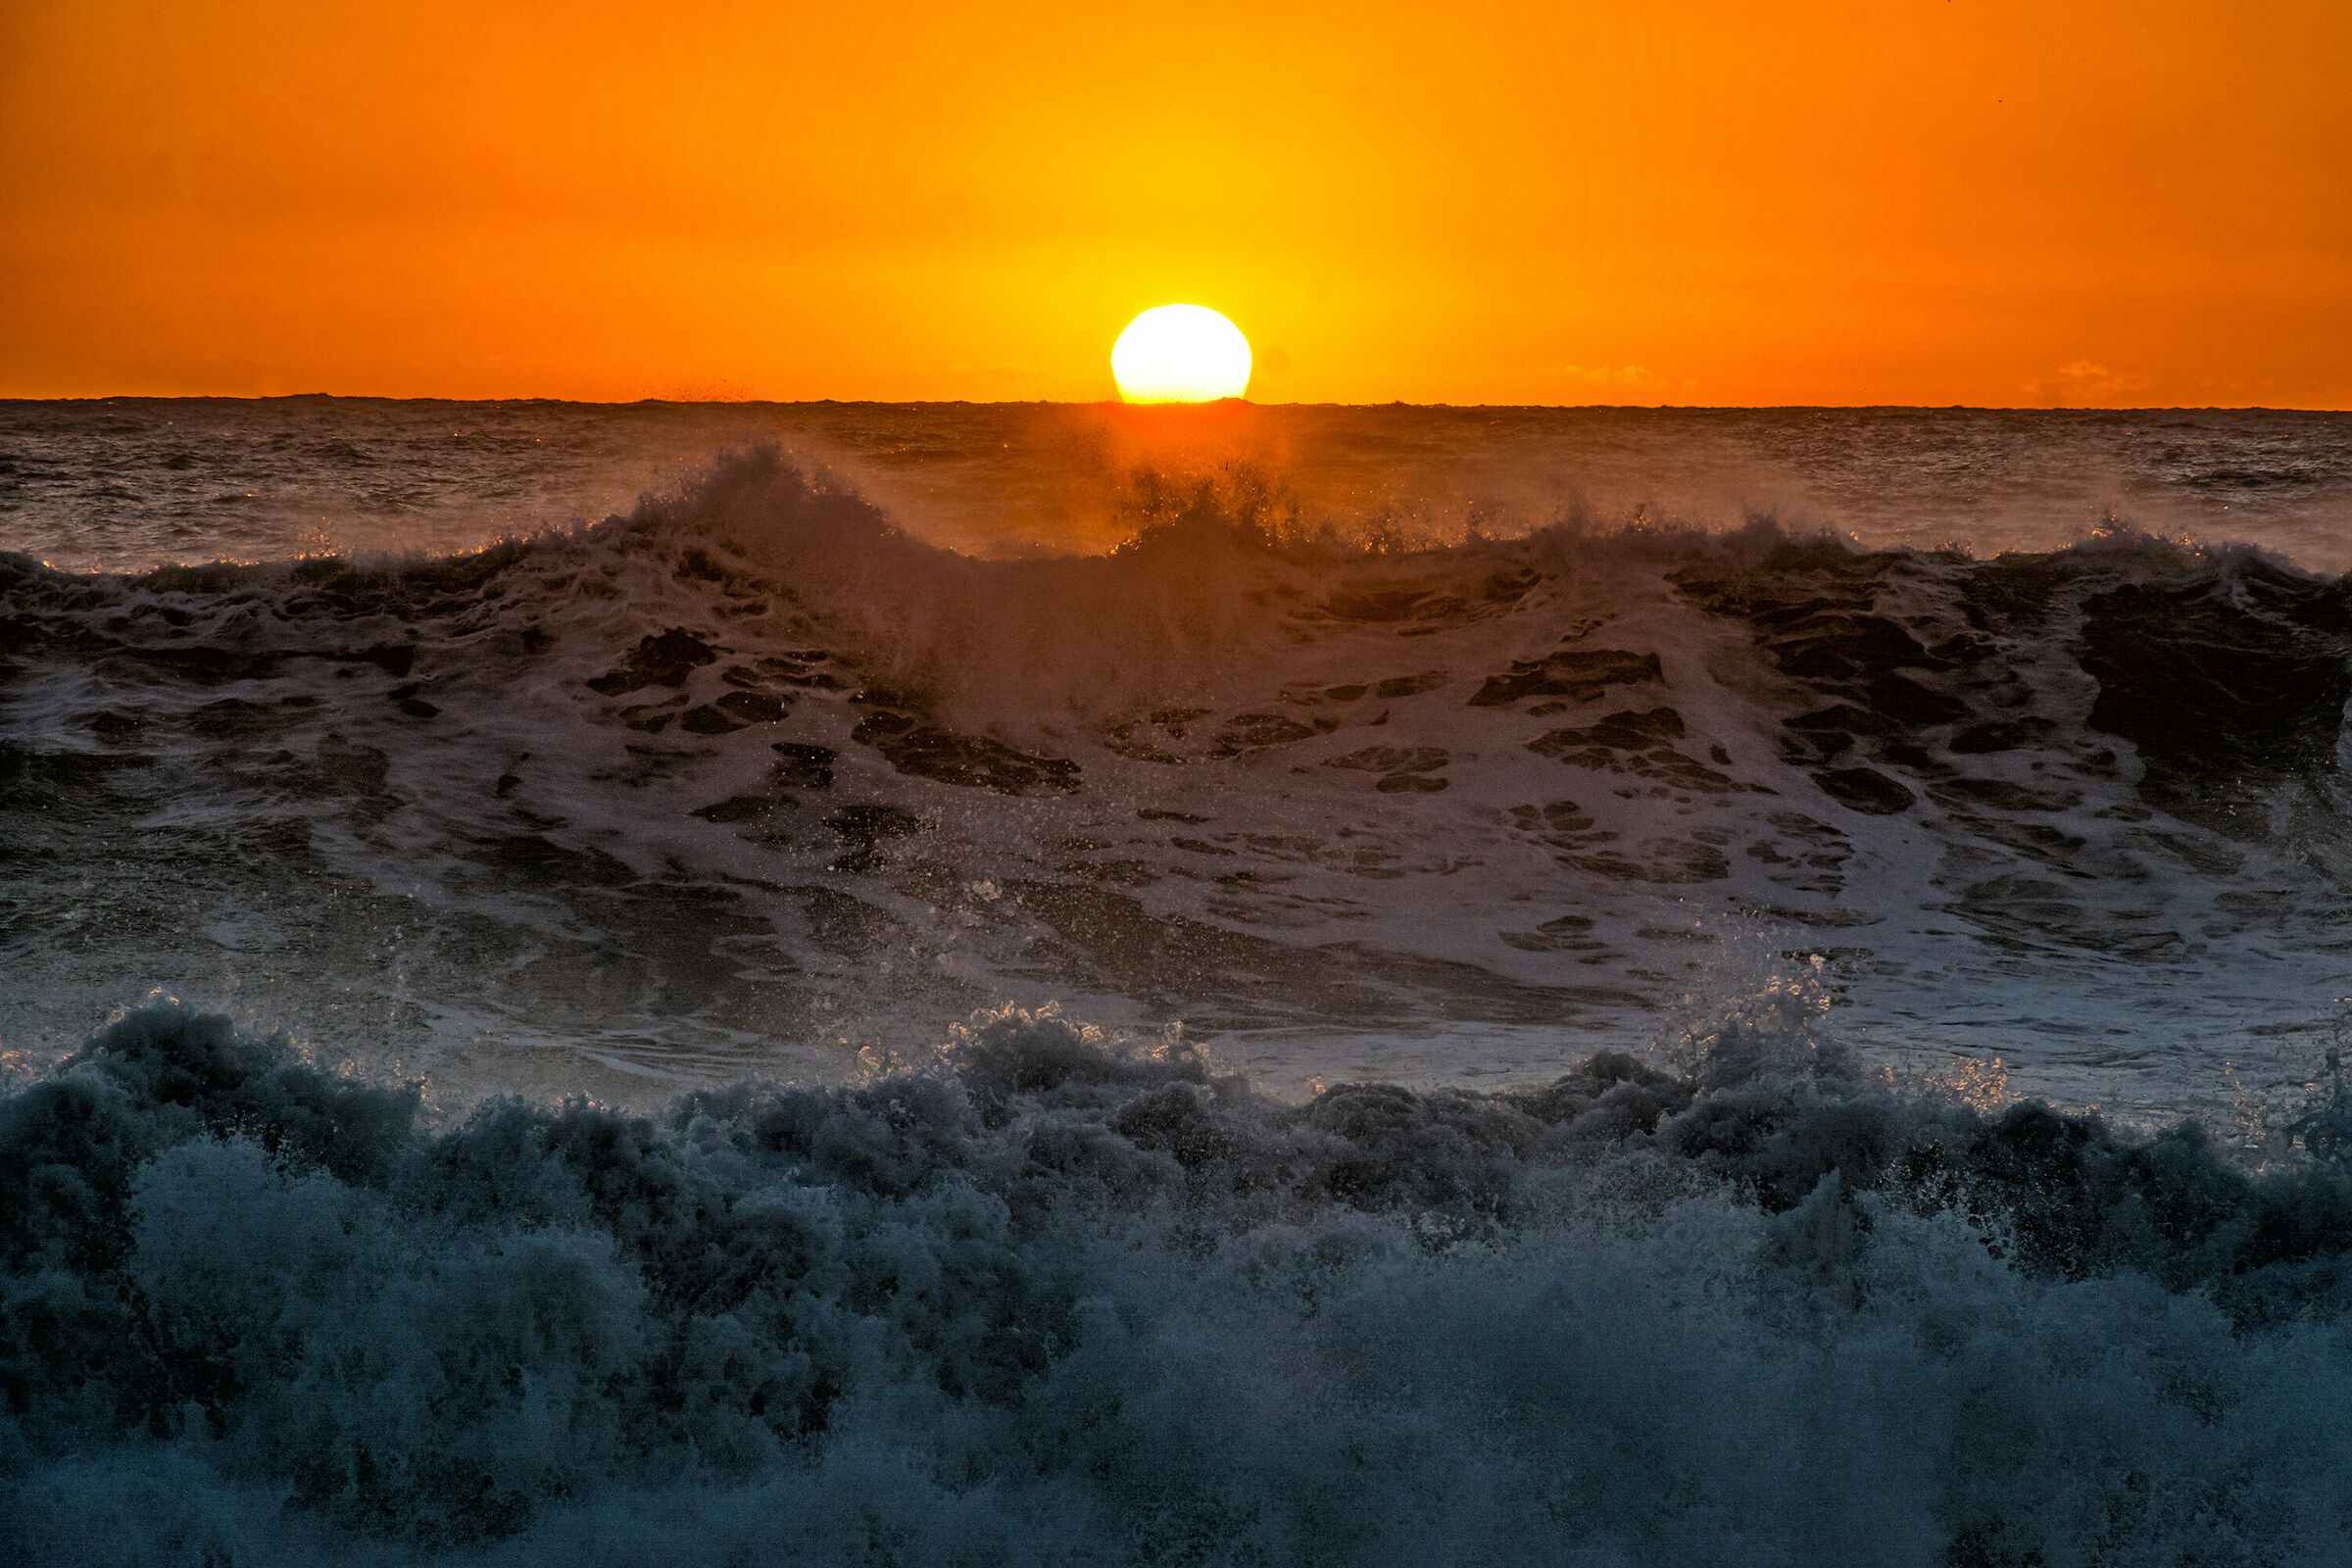 Sunset on the crest of the wave...